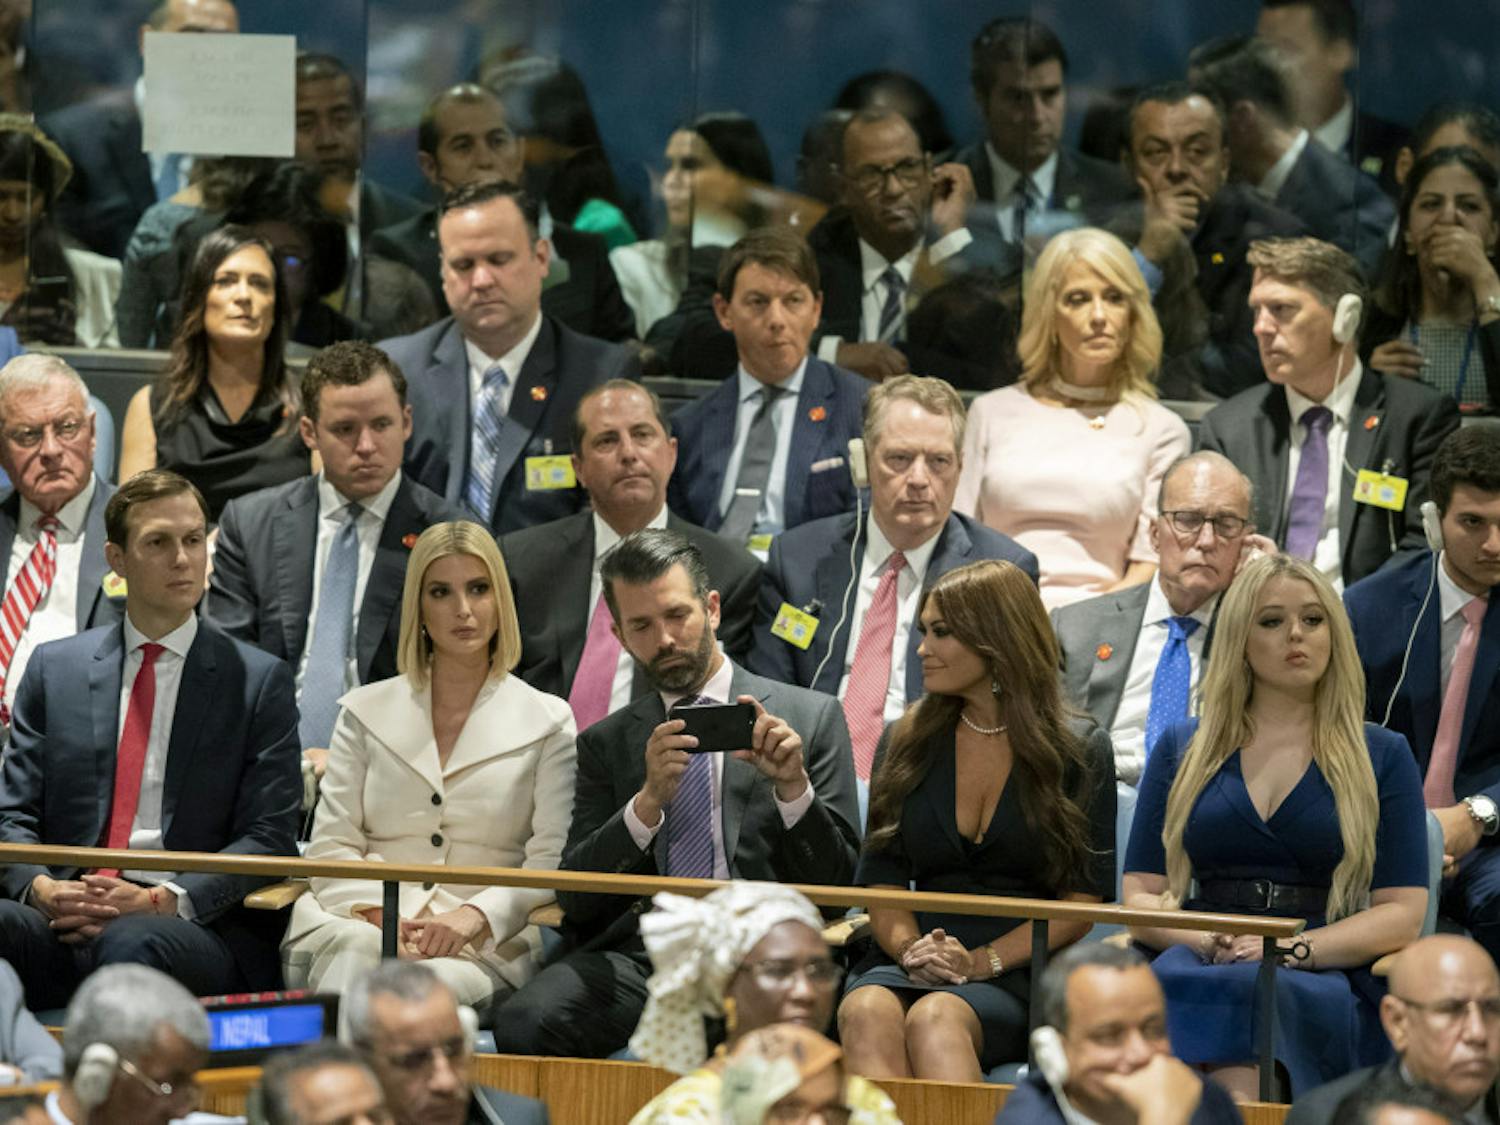 The Trump family, front row, and his staff listen as U.S. President Donald Trump addresses the 74th session of the United Nations General Assembly at U.N. headquarters Tuesday, Sept. 24, 2019. From right to left, Tiffany Trump, Kimberly Guilfoyle, Donald Trump Jr., Ivanka Trump, and Jared Kushner. (AP Photo/Mary Altaffer)